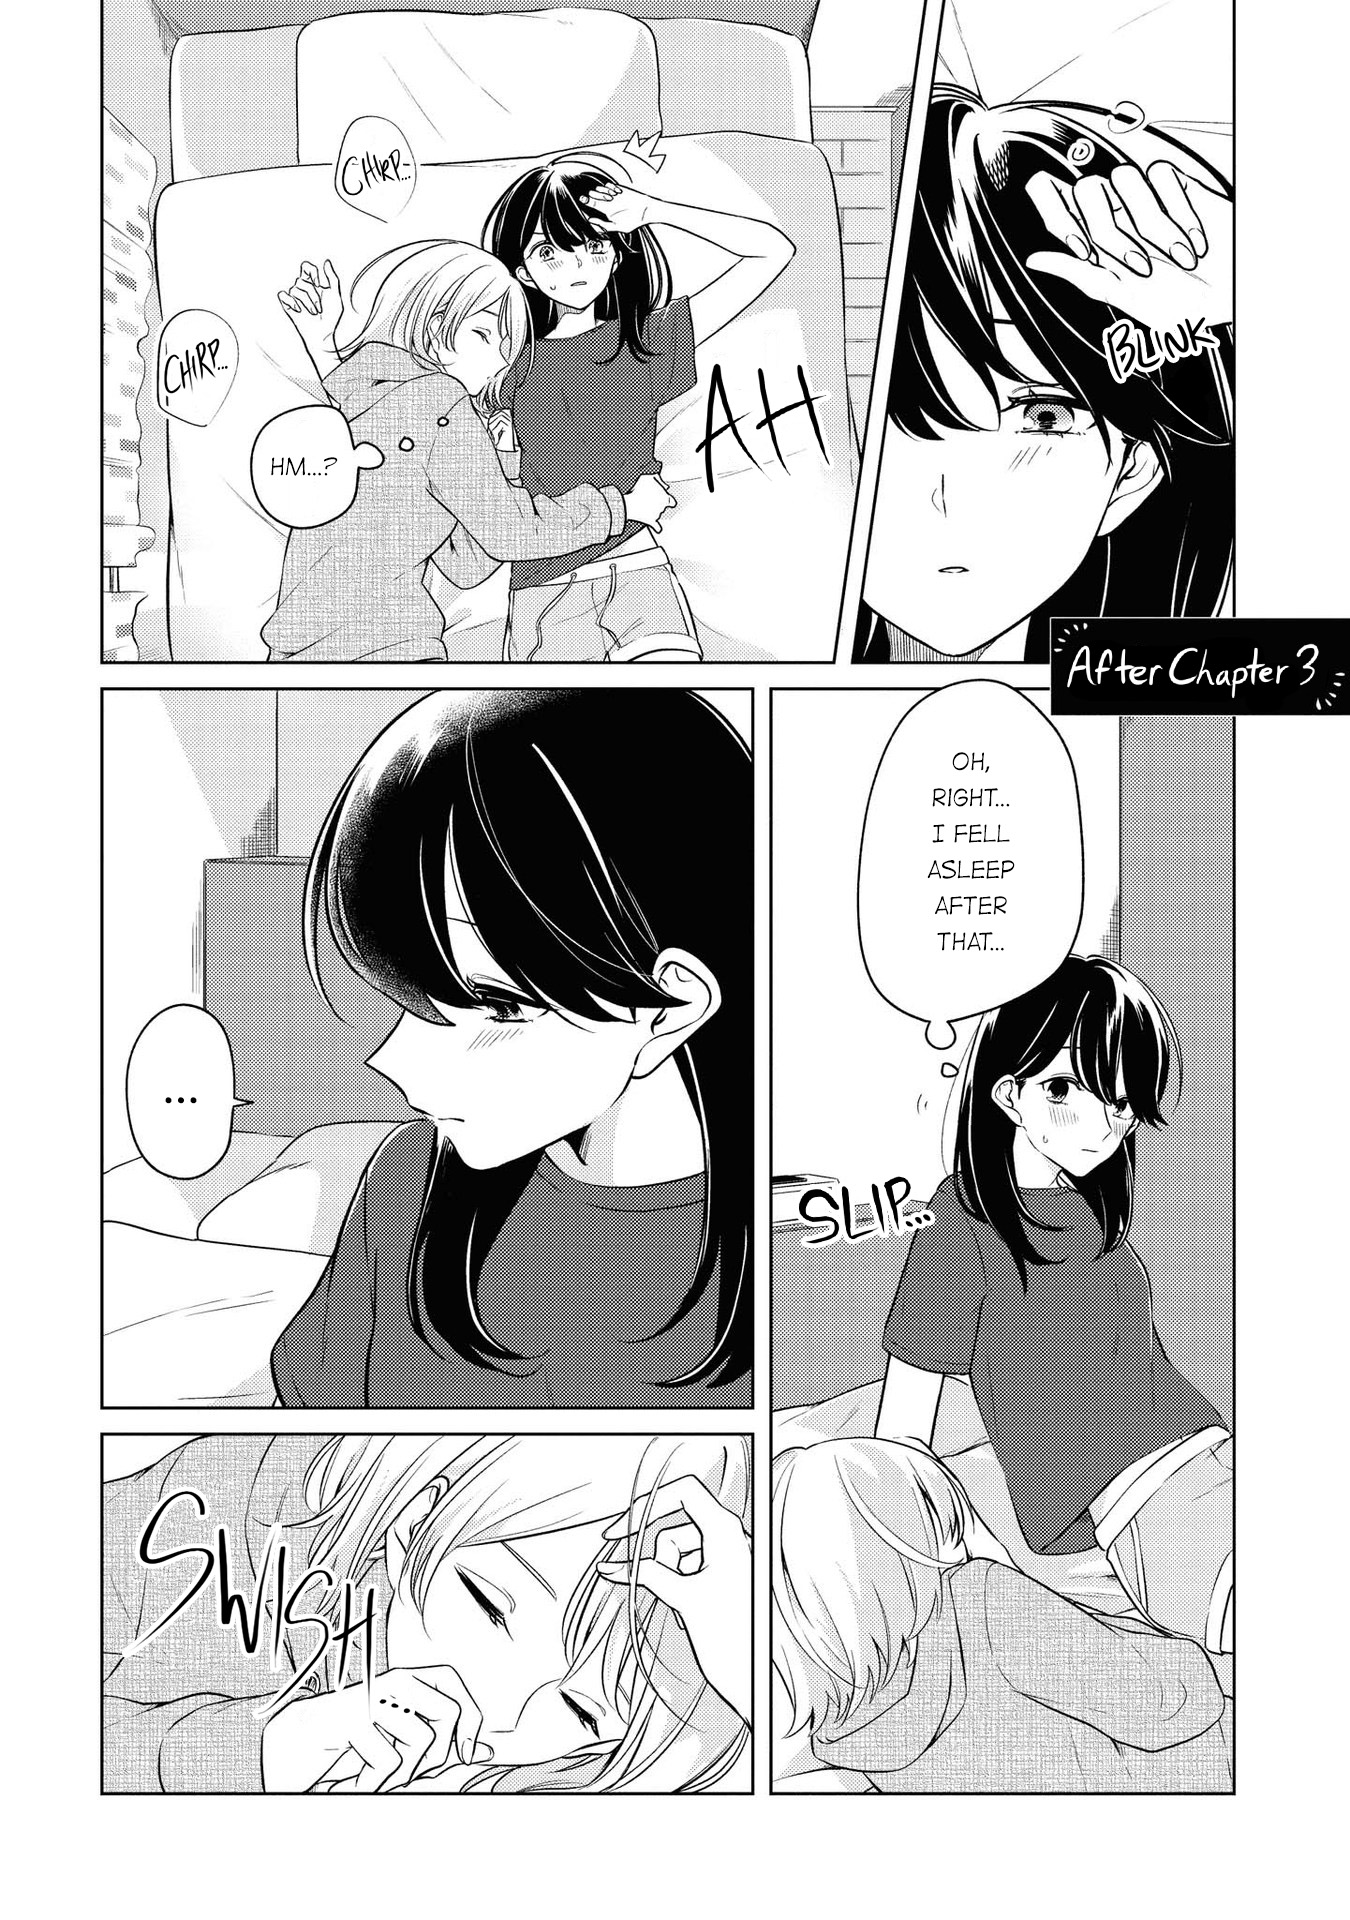 Can't Defy The Lonely Girl Vol.1 Chapter 5.1: Volume 1 Extras - Picture 1